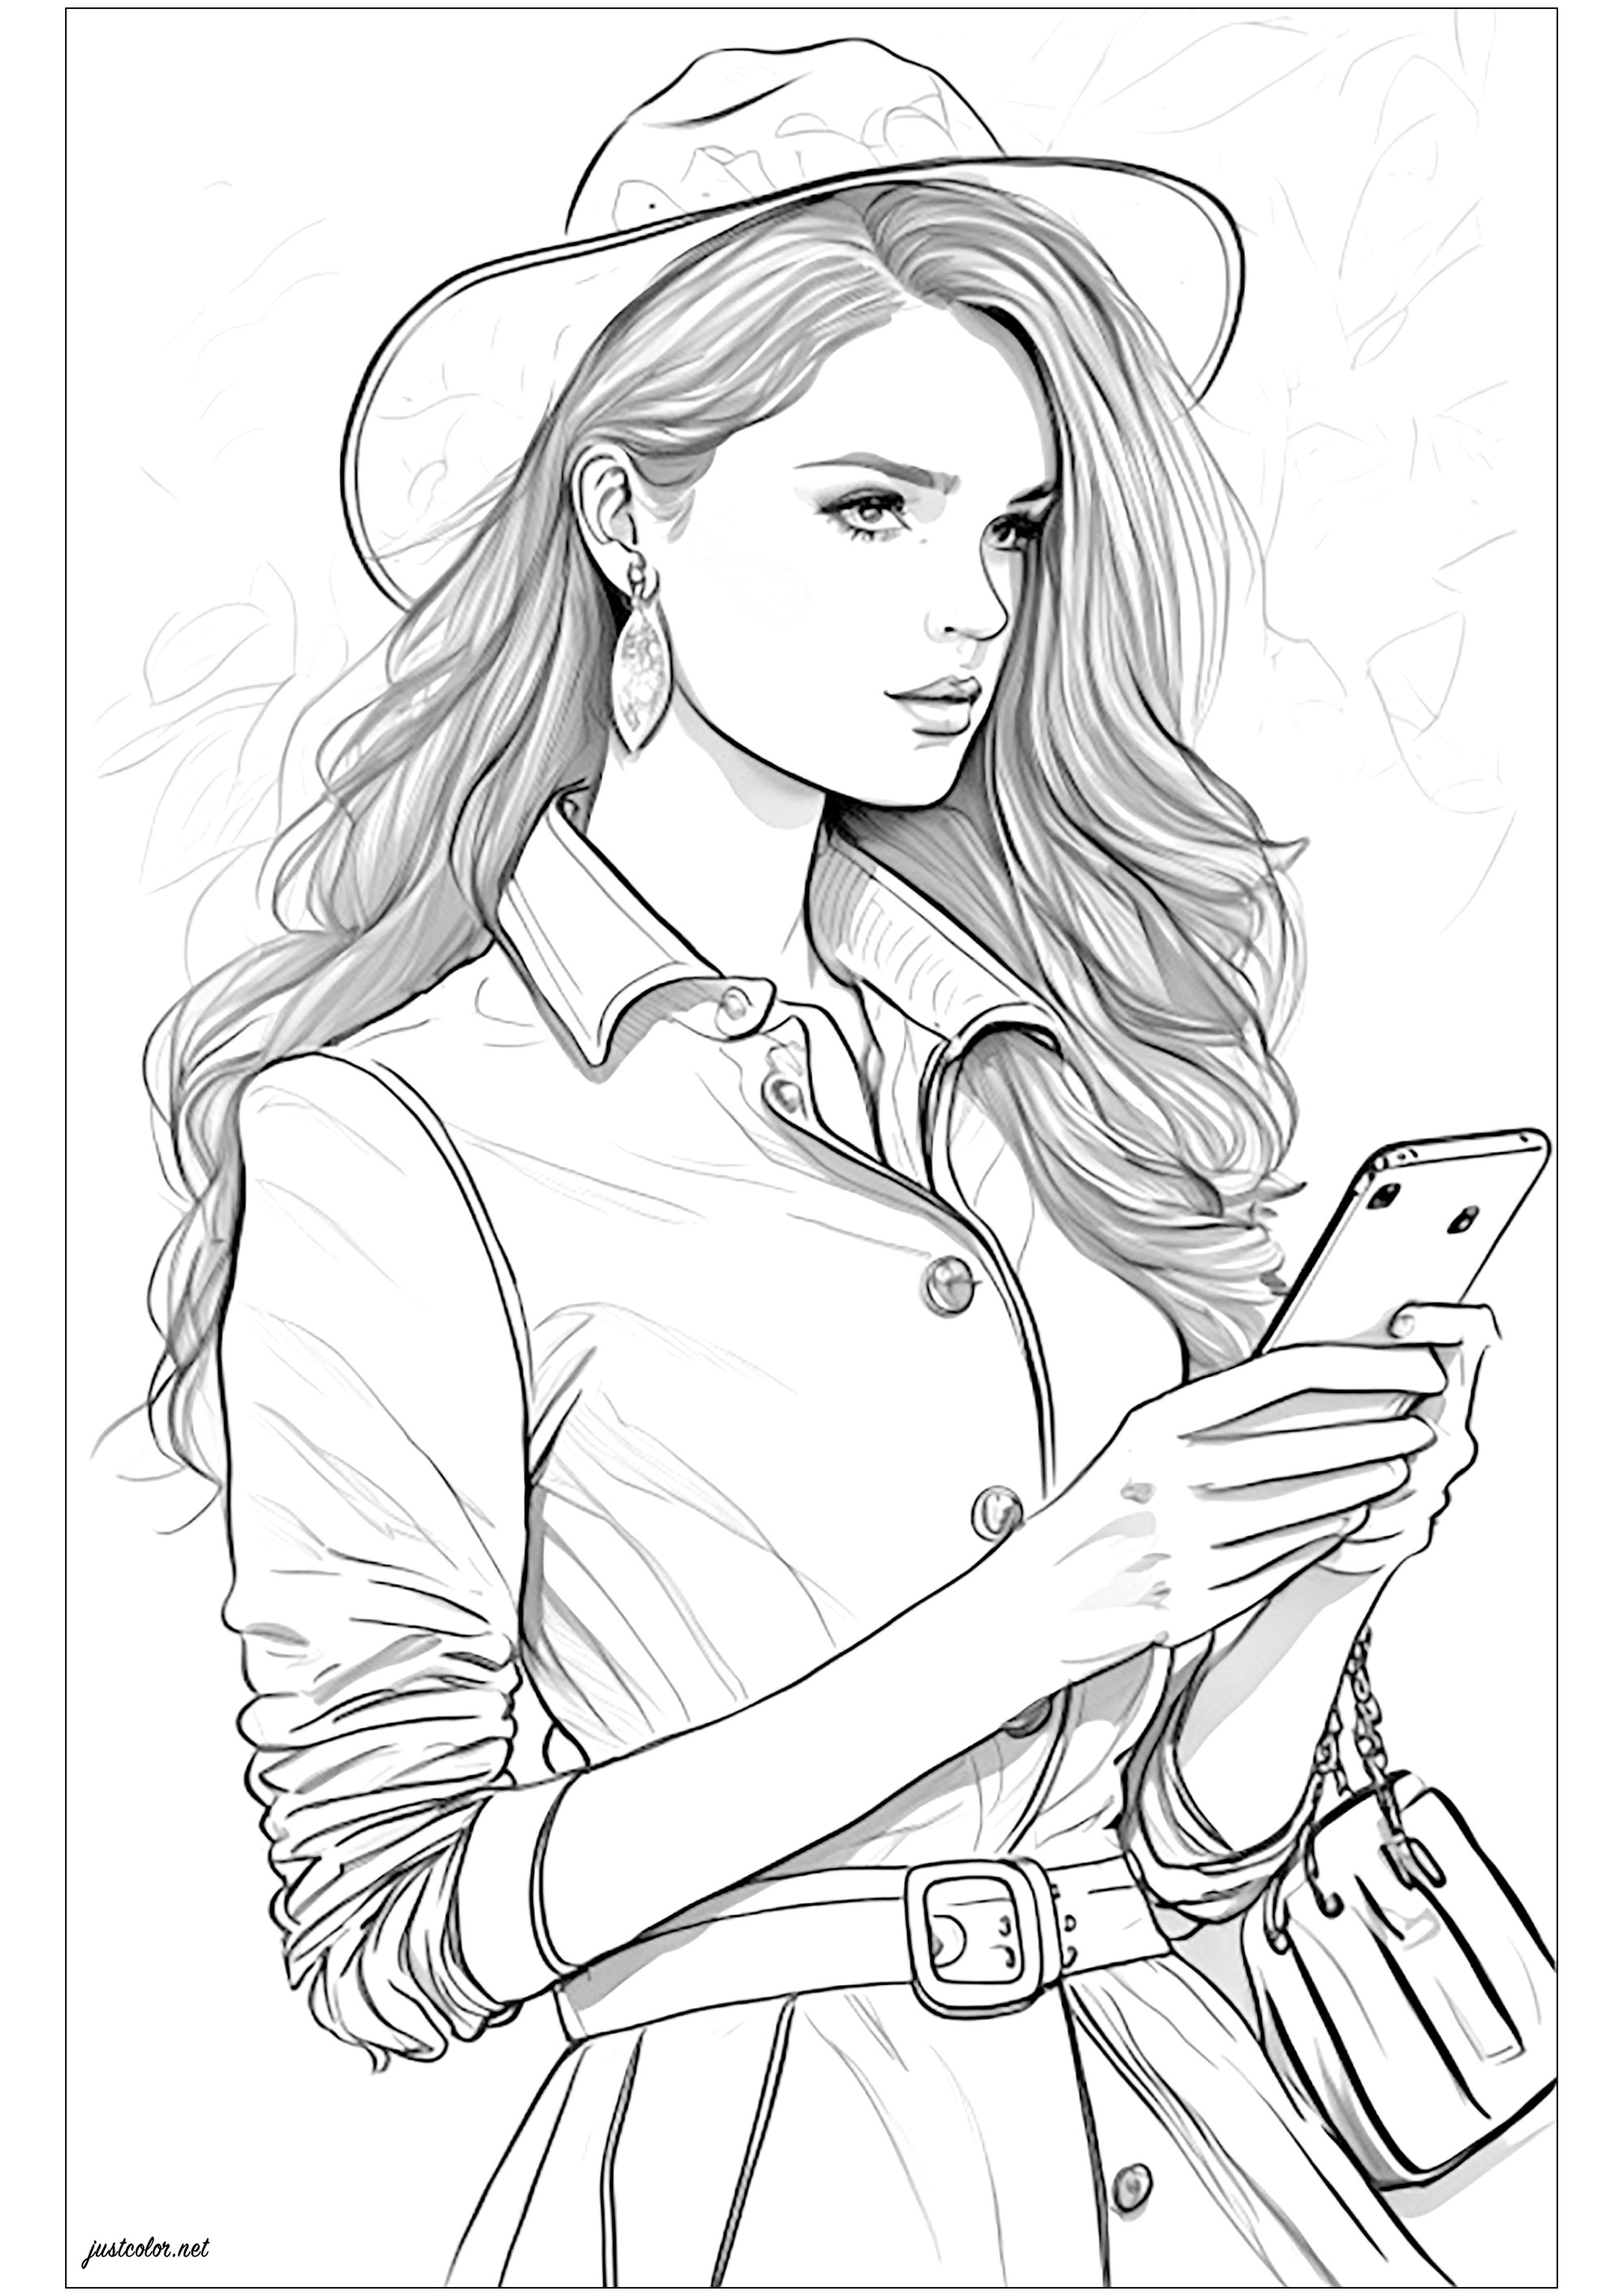 Coloring of a young woman using her smartphone. This pretty young woman holding her smartphone in her hands is dressed in a nice fashionable coat, and walks around with a nice handbag. Her hat completes her very elegant style. What colors would you choose to embellish her?